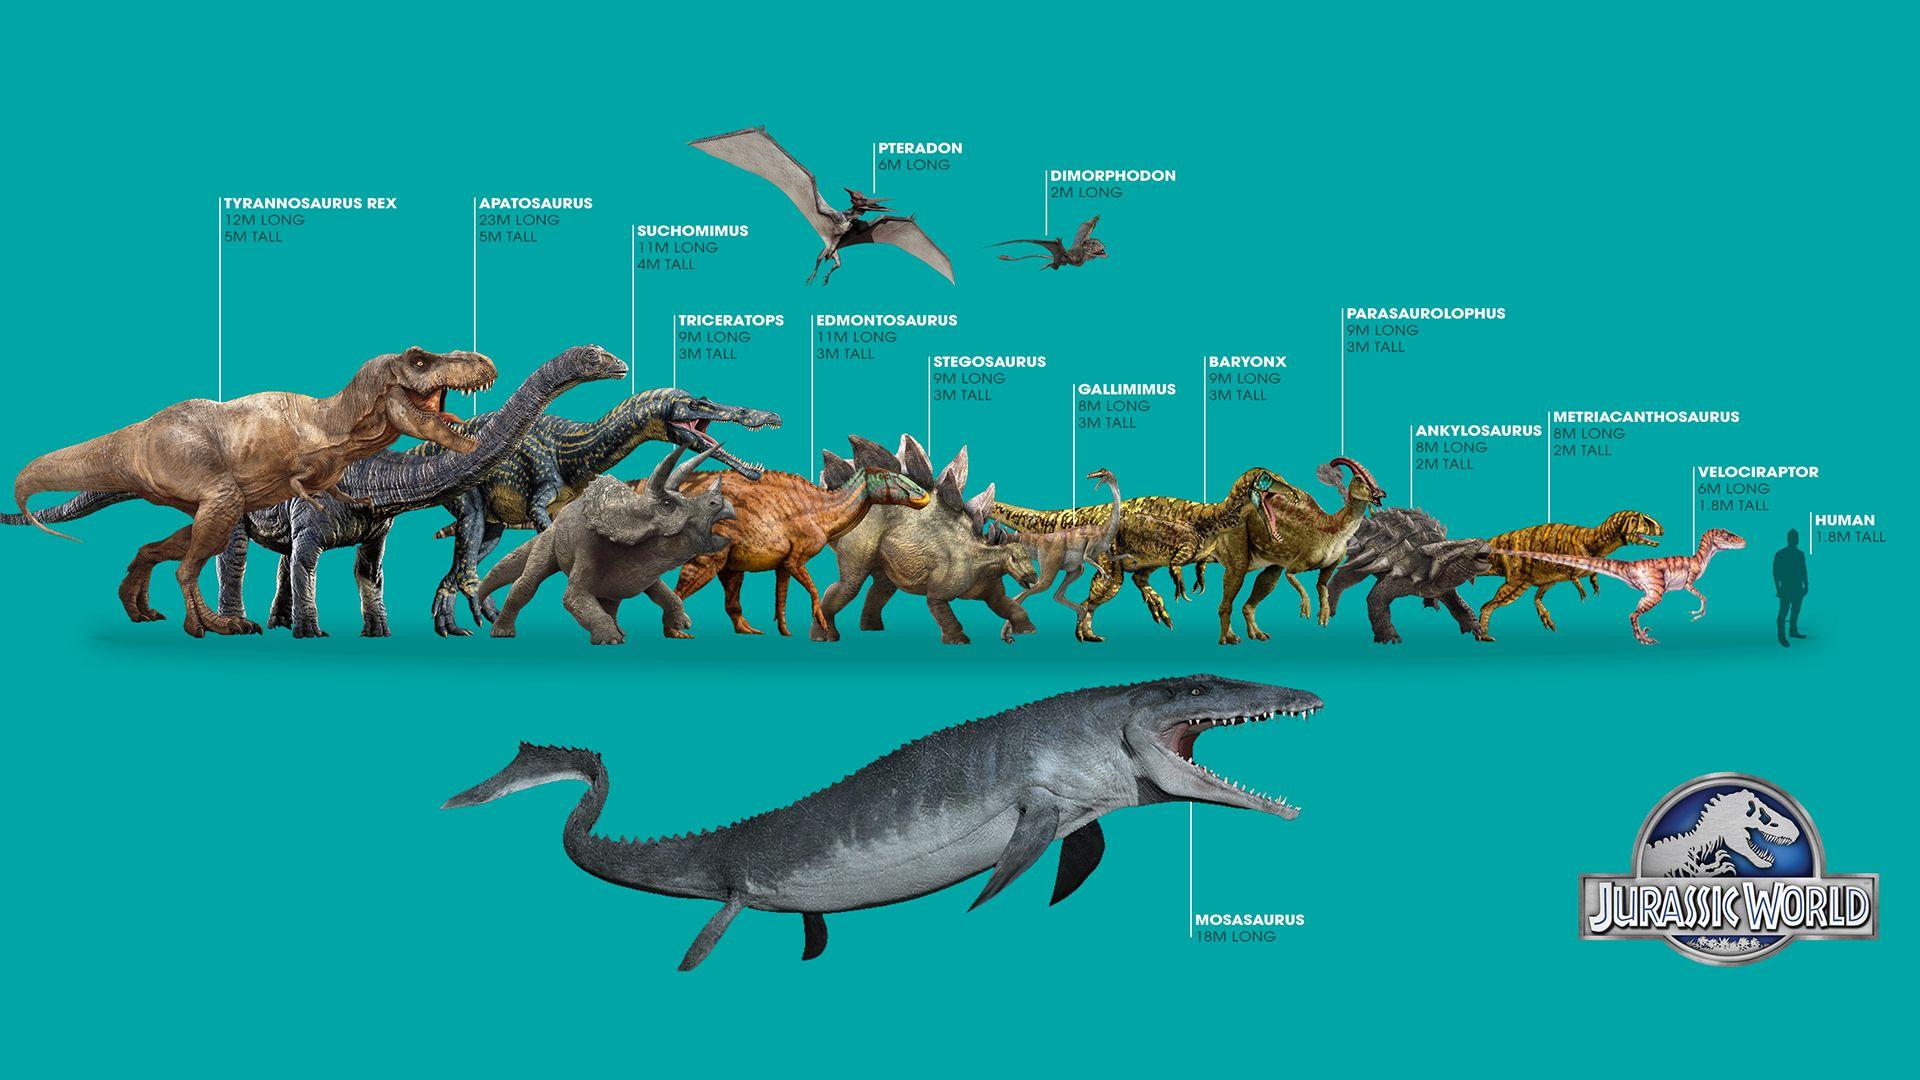 Jurassic World Dinosaurs Wallpaper Sizes and Correct Scale :D